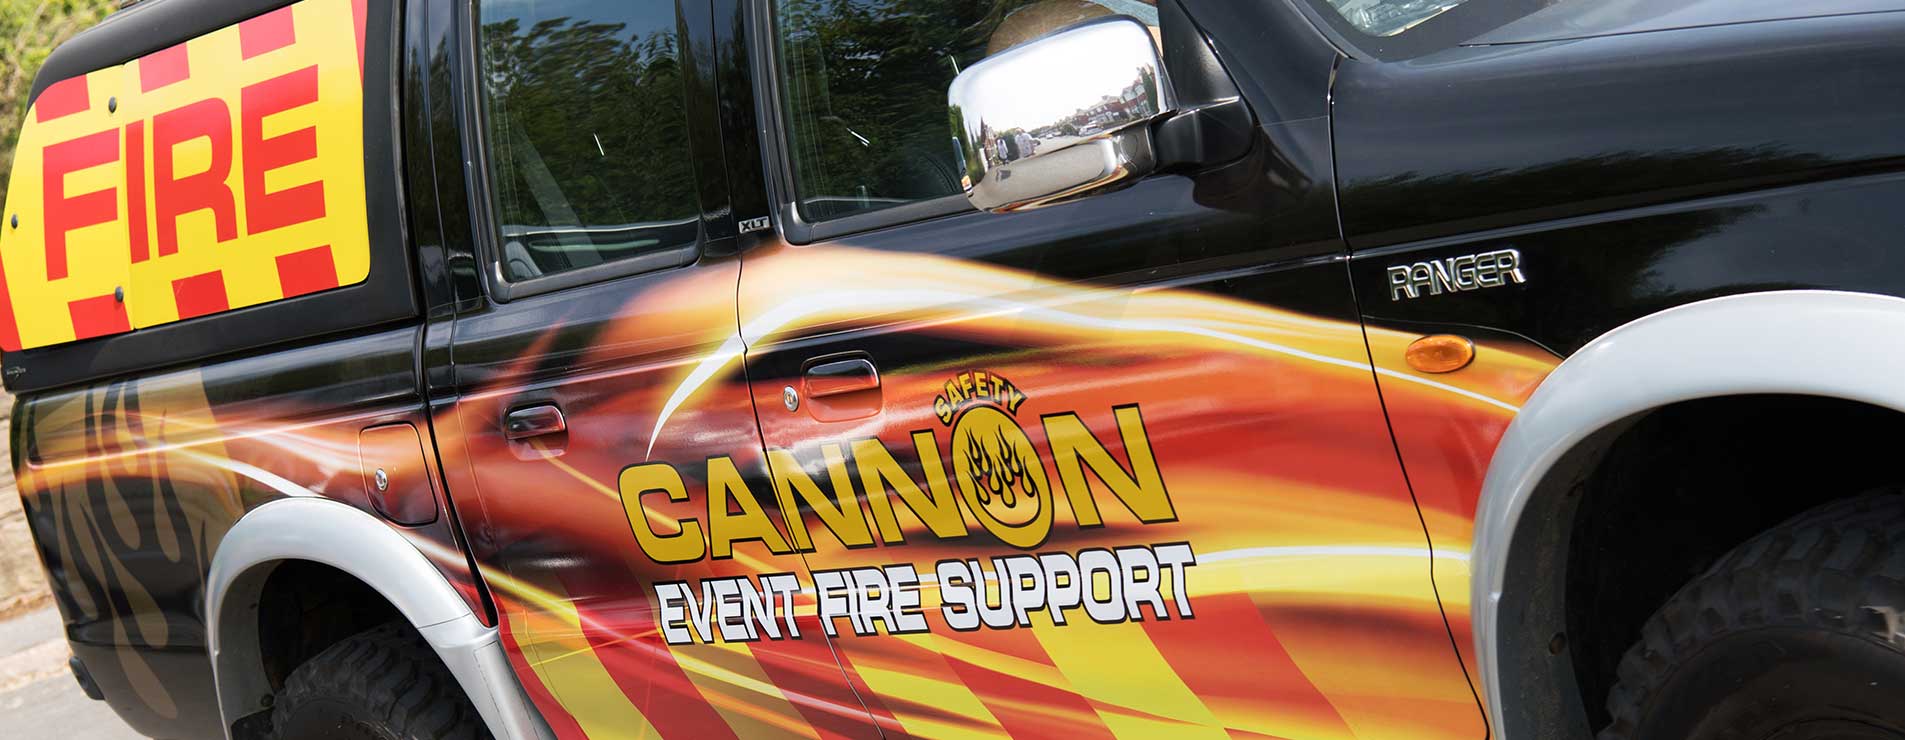 Cannon Safety truck